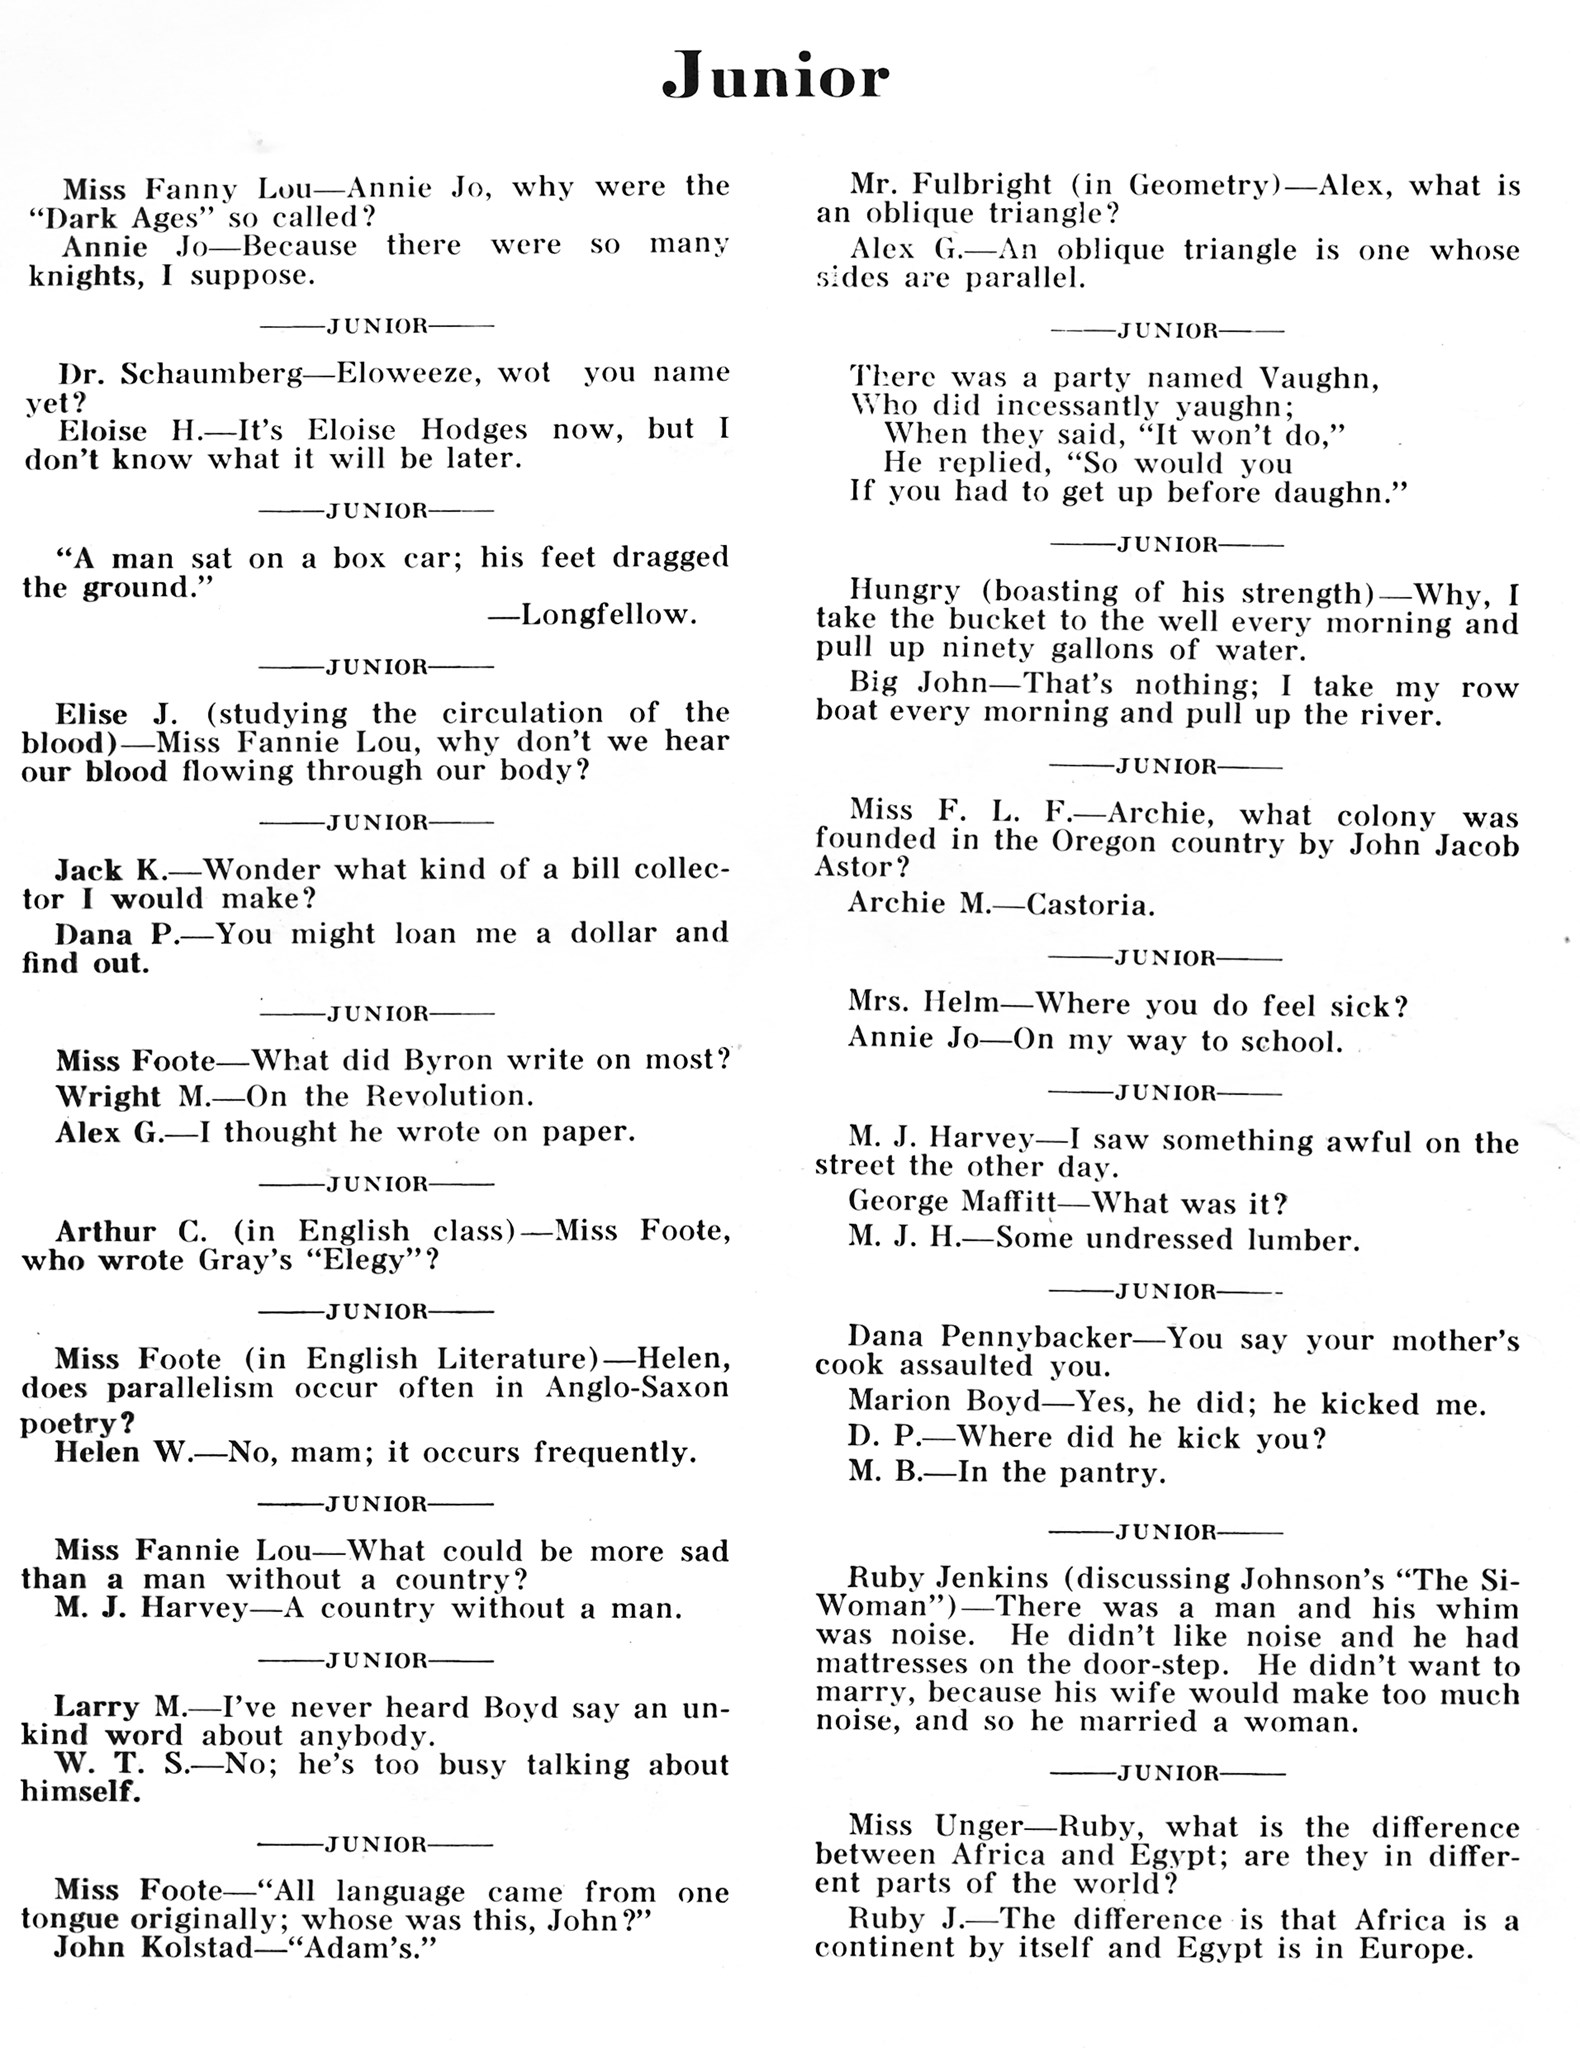 ../../../Images/Large/1915/Arclight-1915-pg0028.jpg